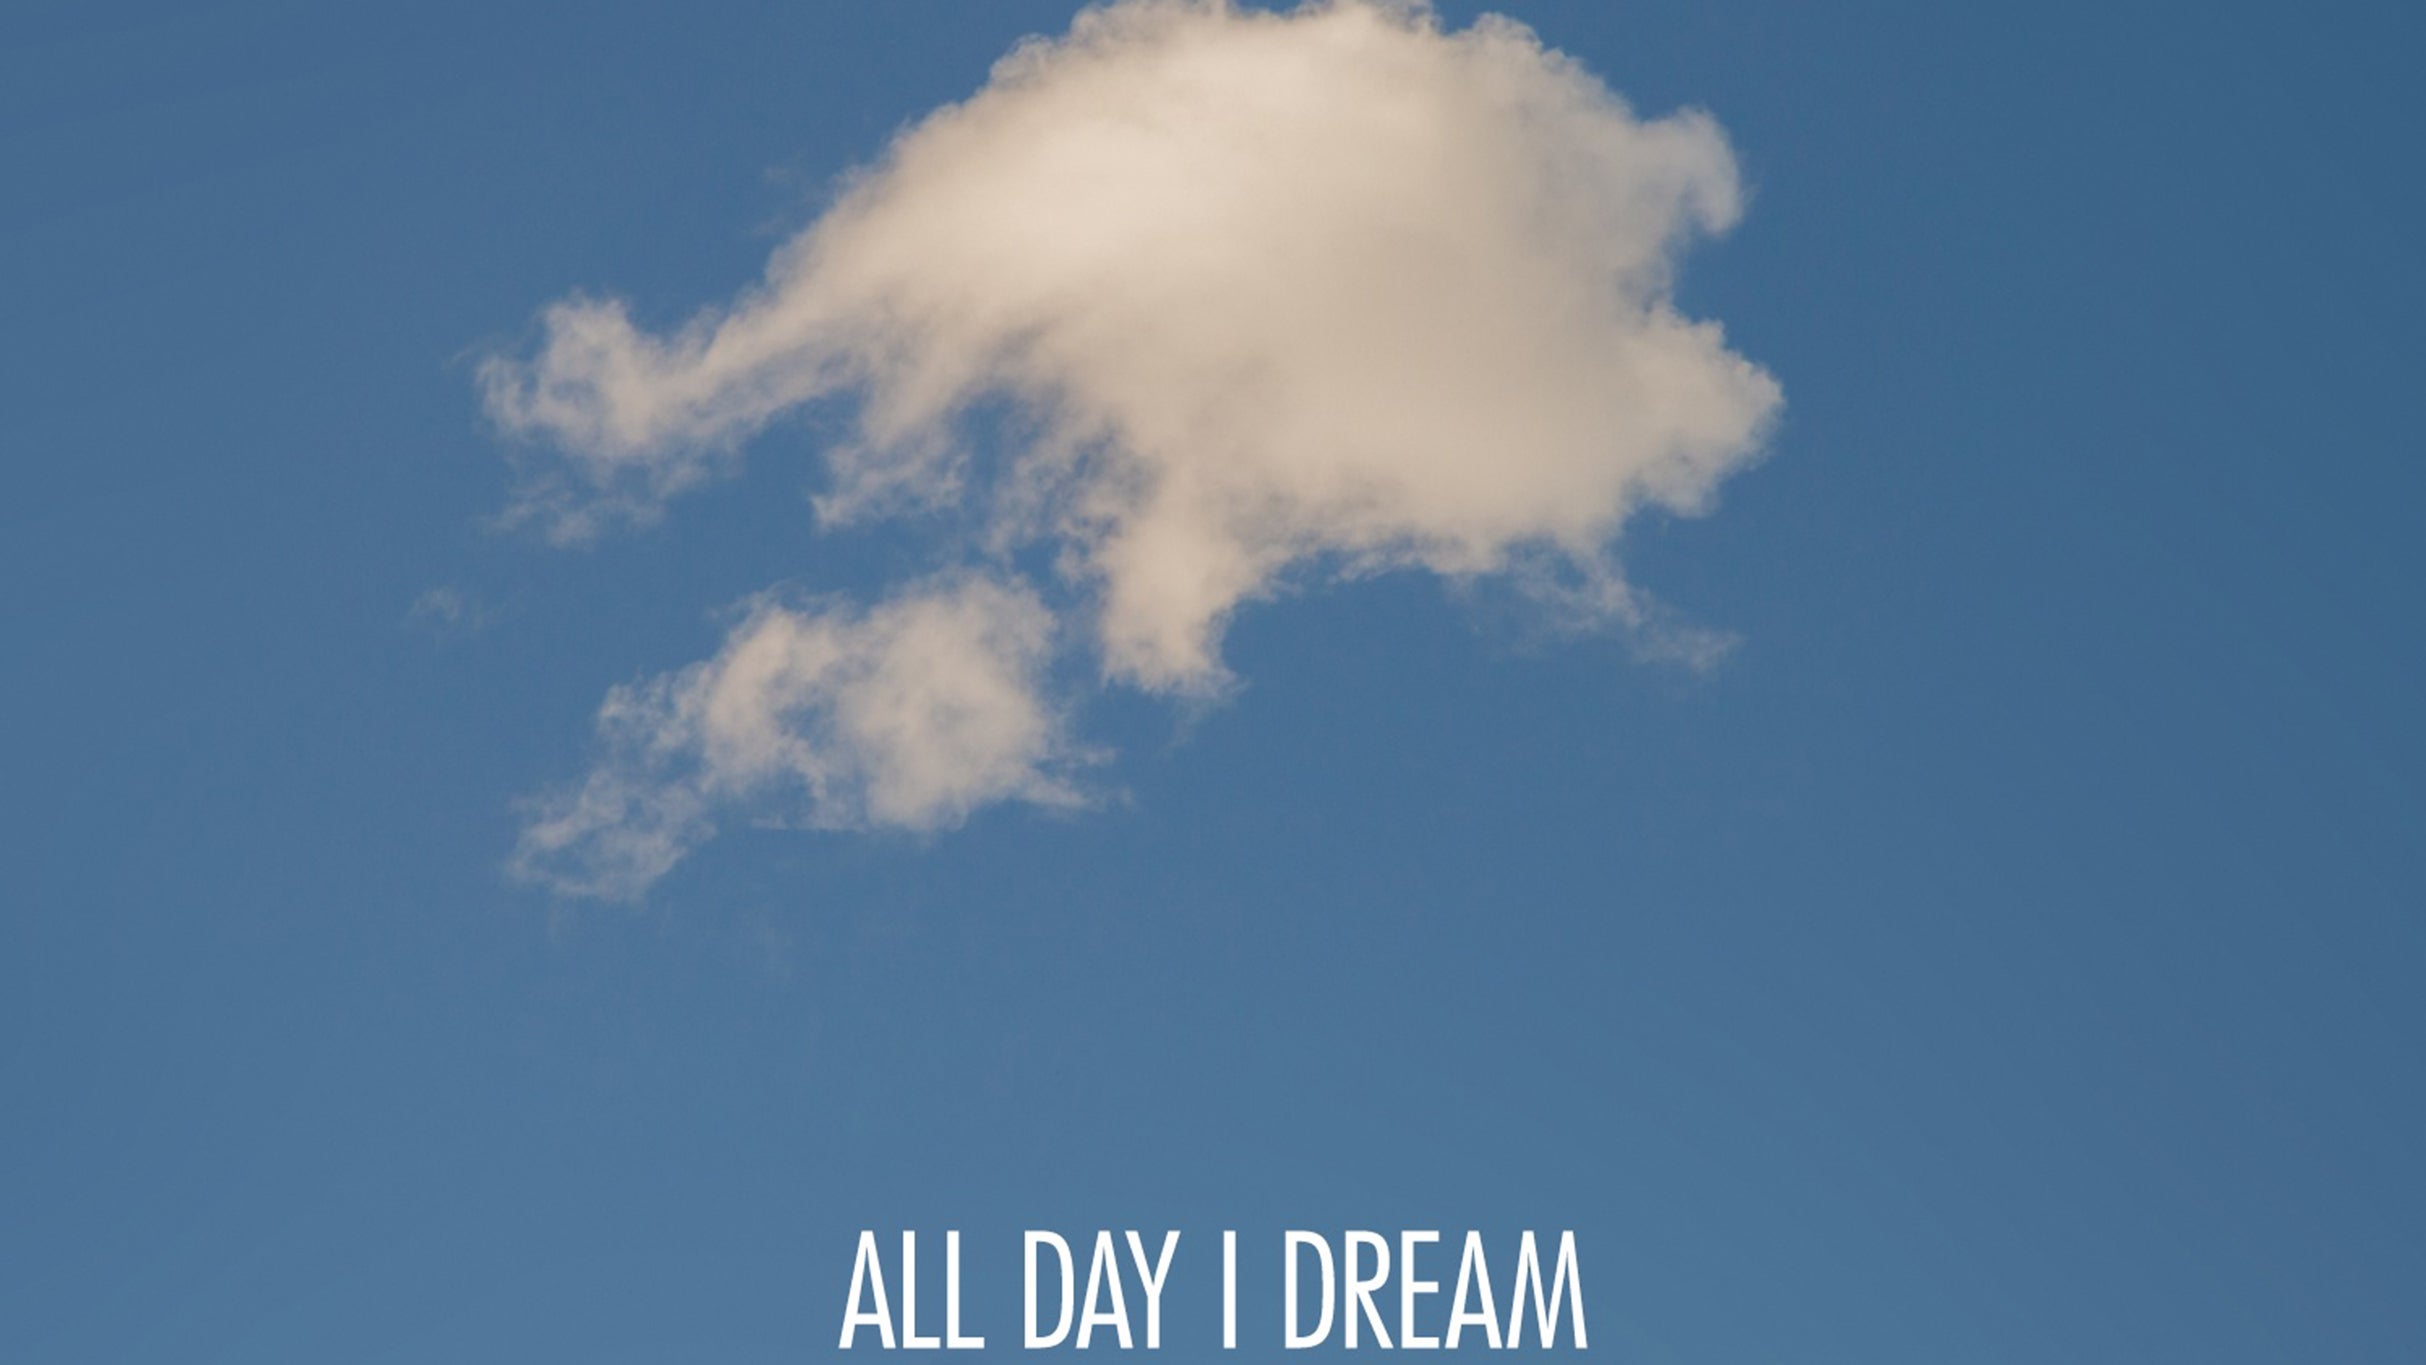 All Day I Dream at Sculpture Park